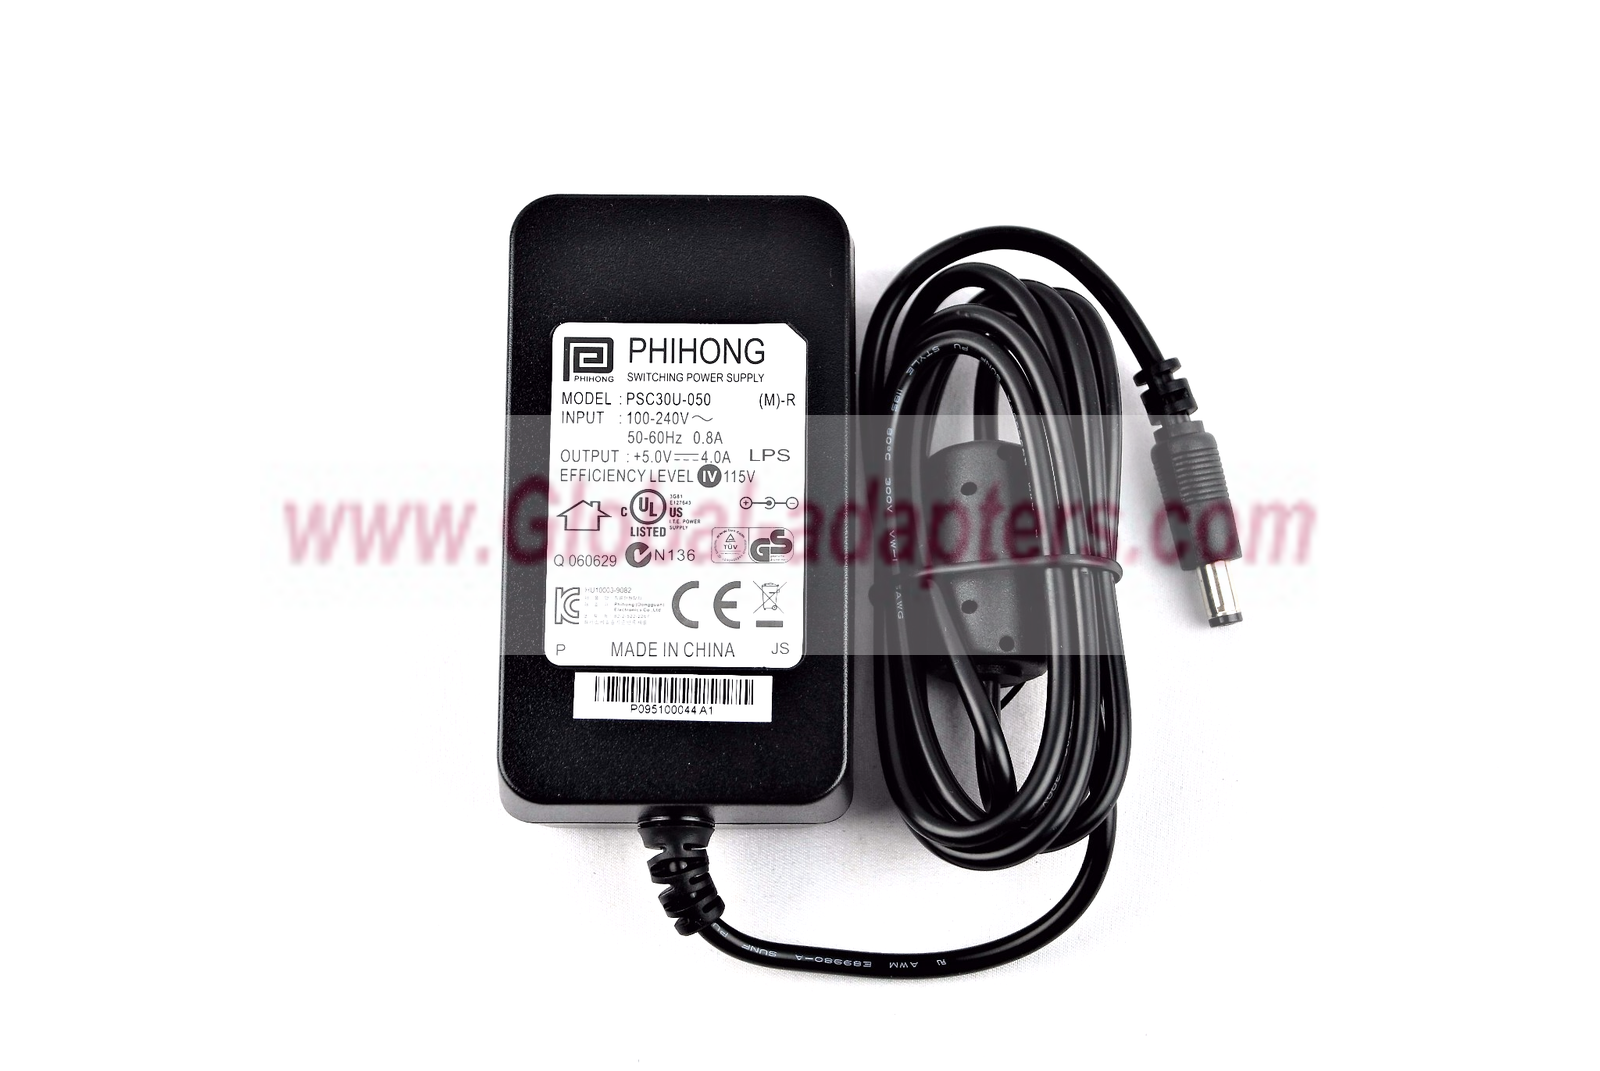 NEW 5V 4A PHIHONG PSC30U-050 P095100044A1 SWITCHING AC ADAPTER